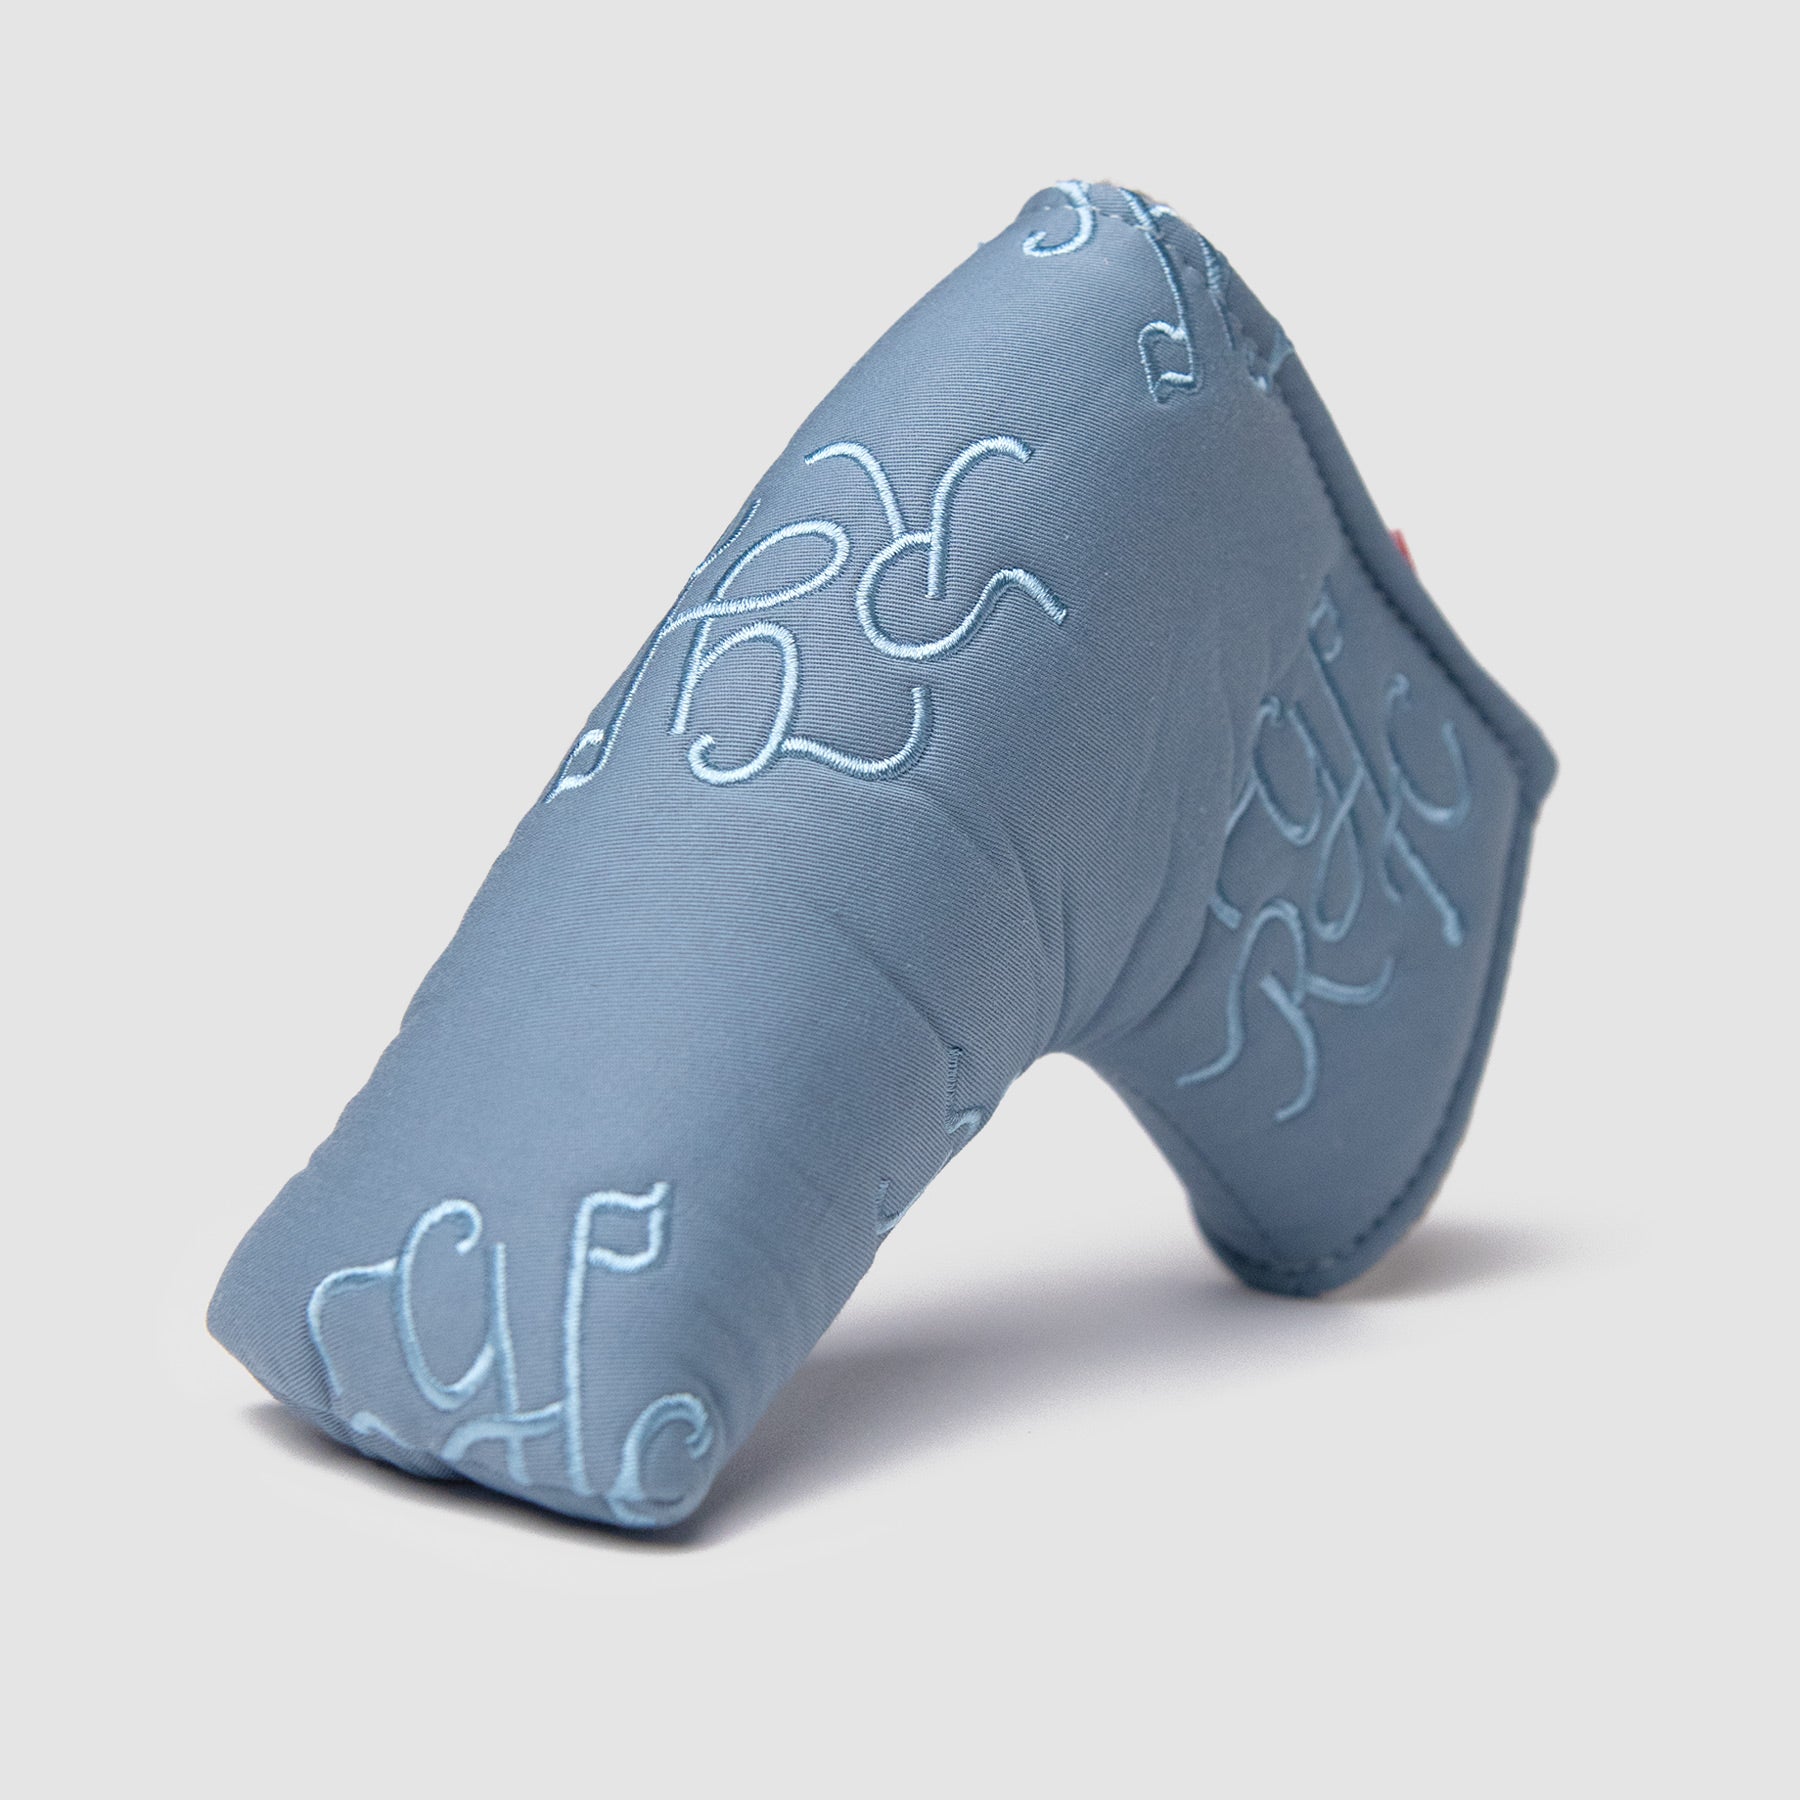 Drizzle Blade Putter Headcover